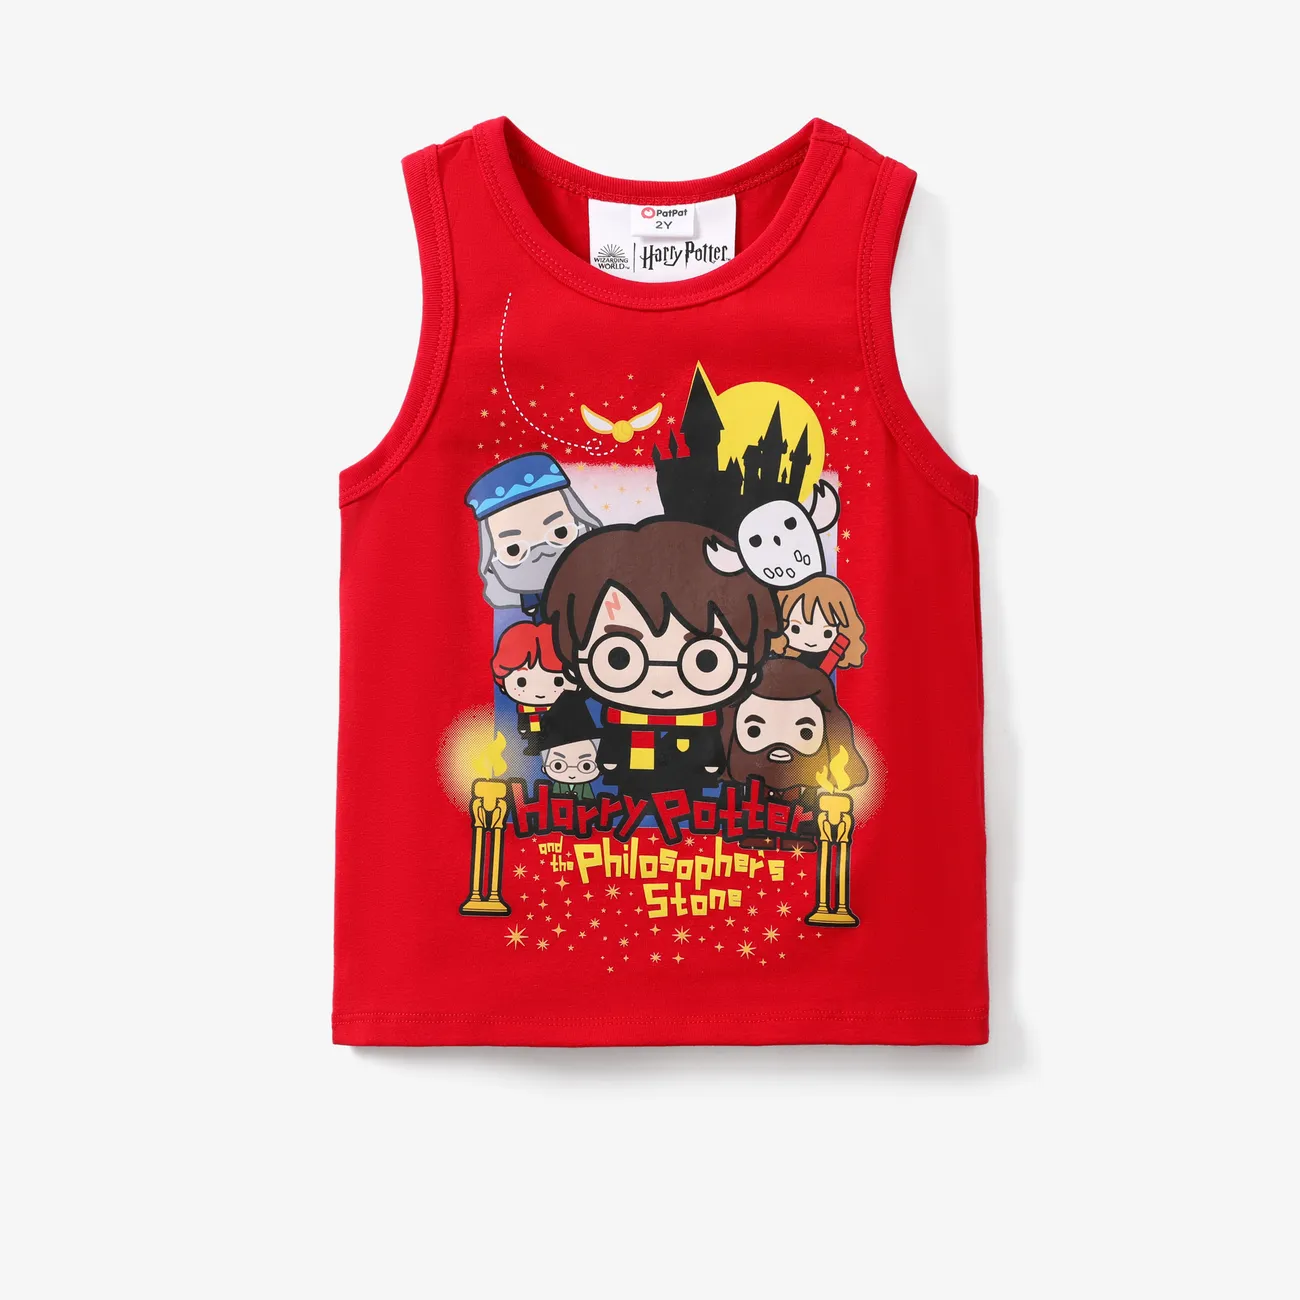 Hary Potter 1pc Toddler Boys Character All-over Print Sporty T-shirt/Tank Top/Shorts Red big image 1